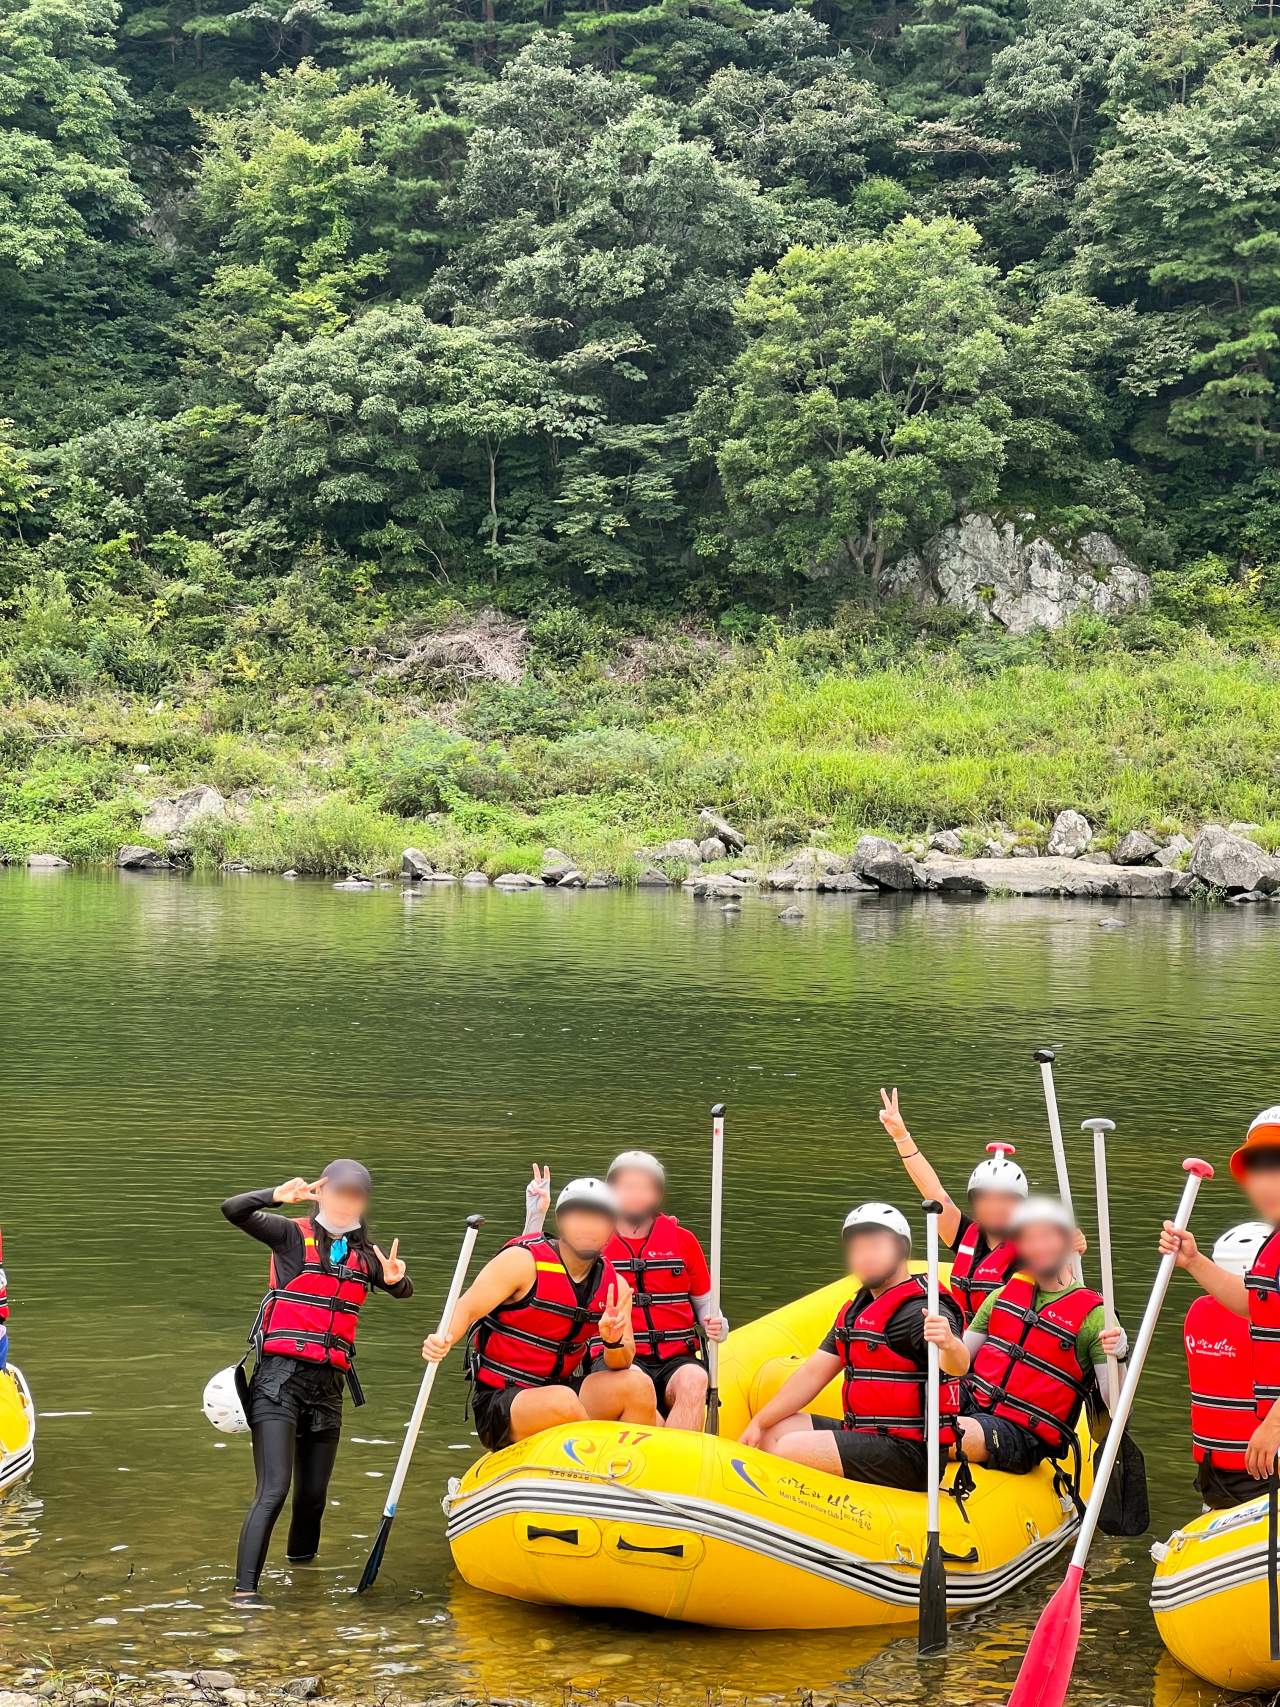 Native English teacher Jack Anderson (pseudonym) joins friends for rafting on a day off from work in Sancheong-gun, South Gyeongsang Province, August 2022. (Courtesy of Jack Anderson)